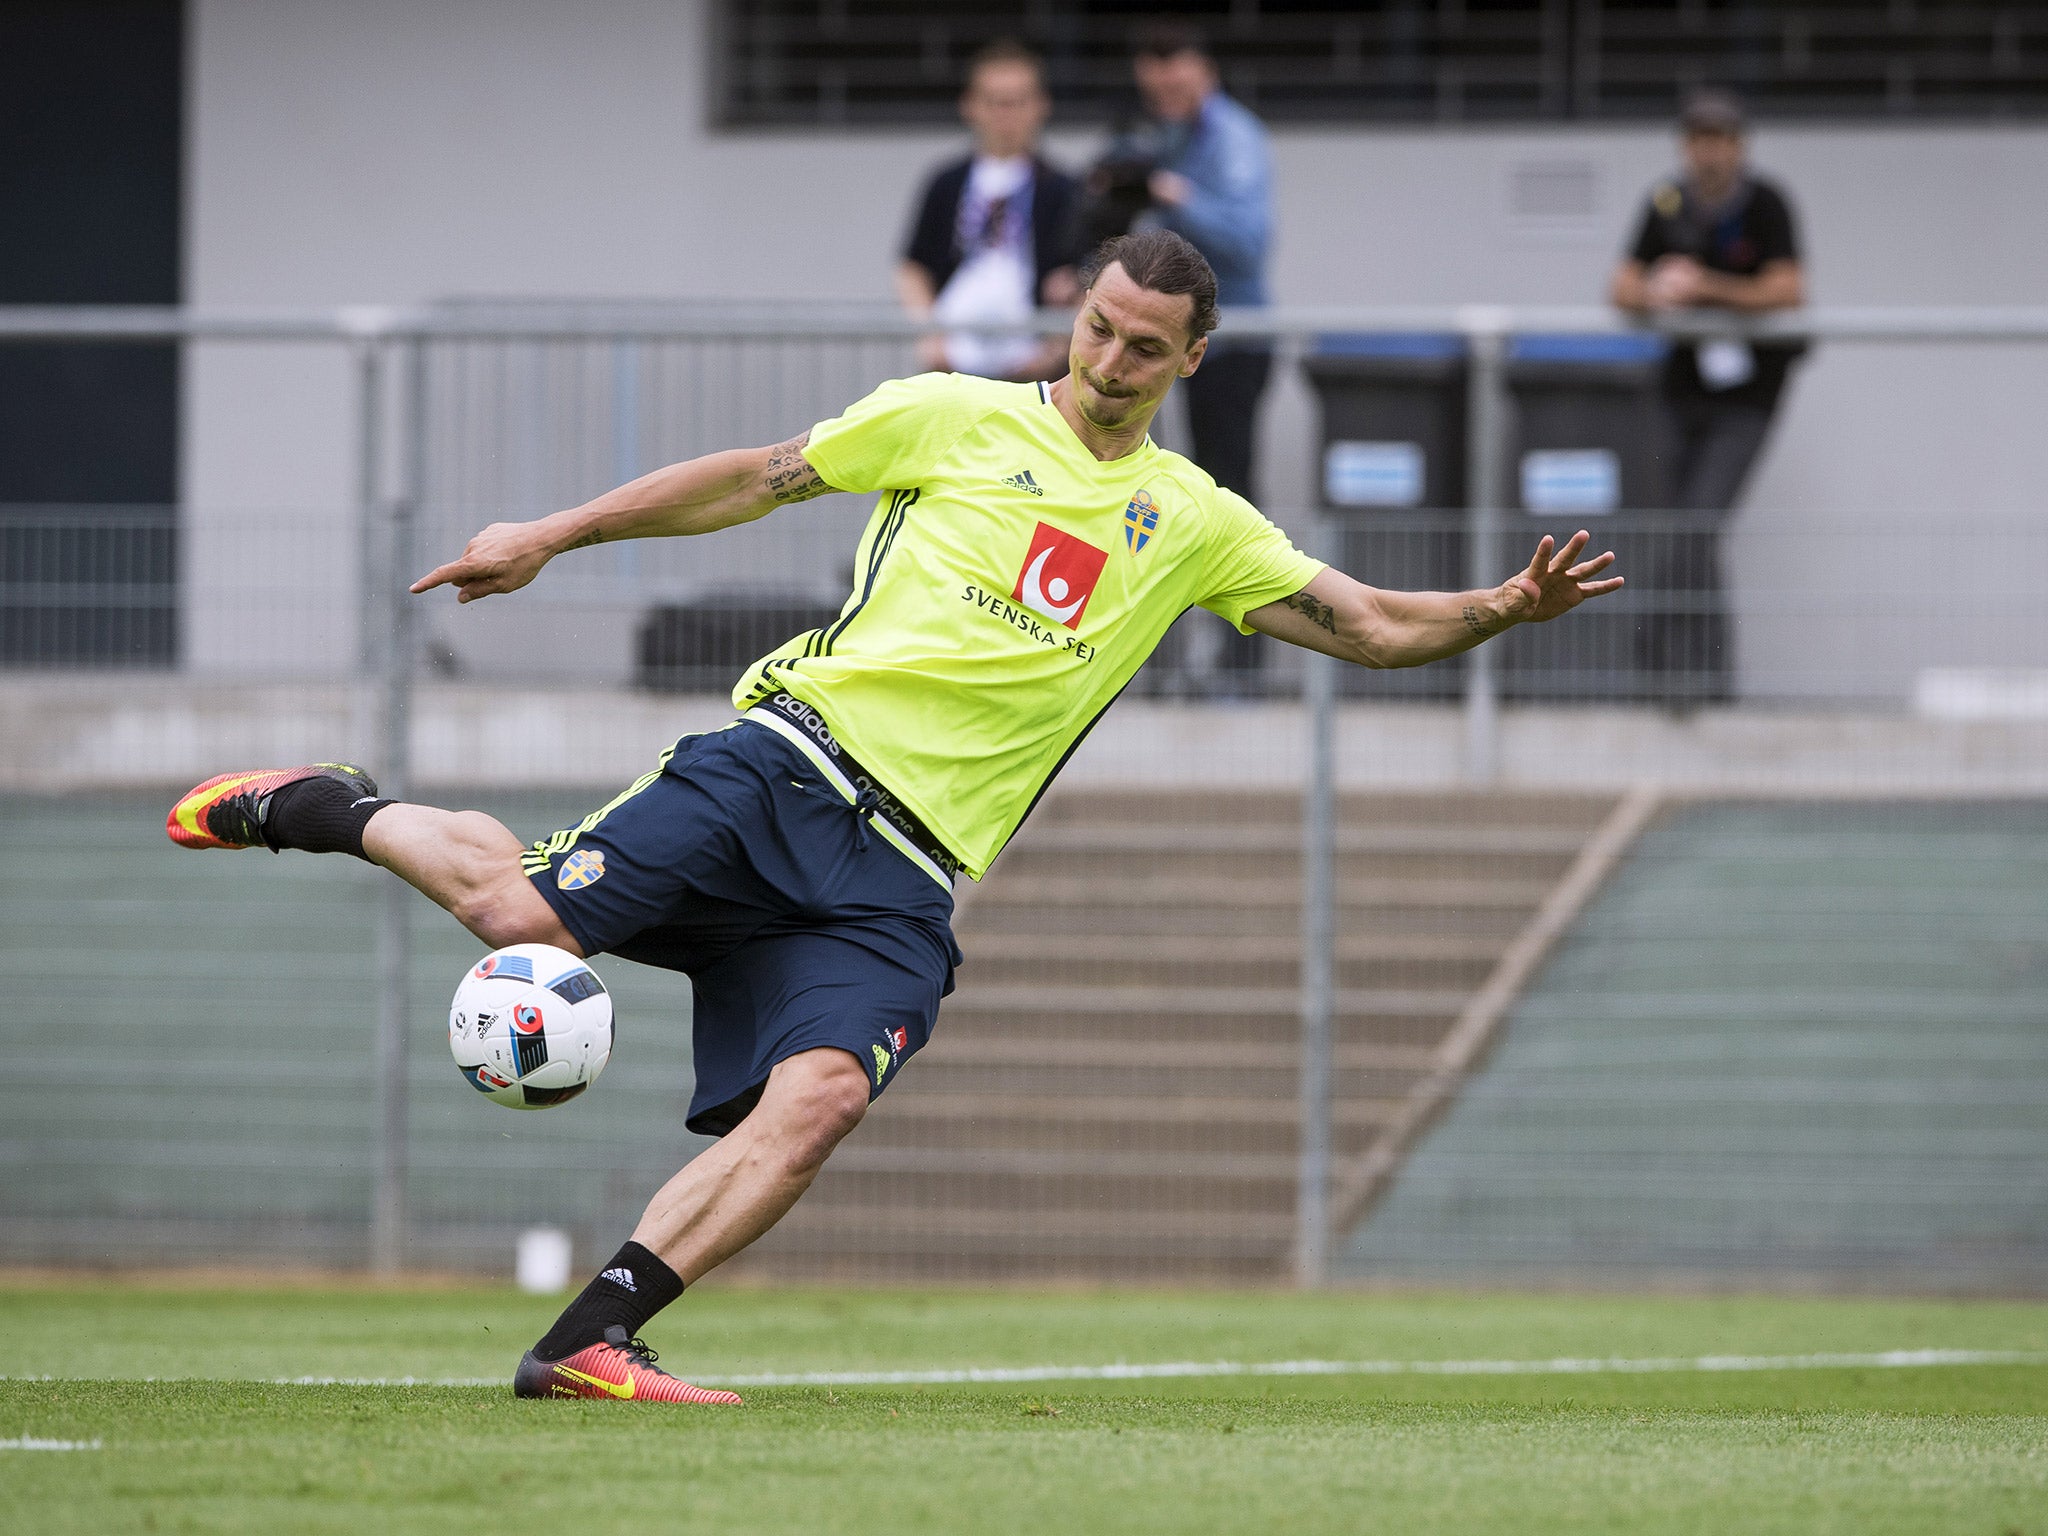 Zlatan Ibrahimovic in a Sweden training session ahead of their opening Euro 2016 match against Republic of Ireland